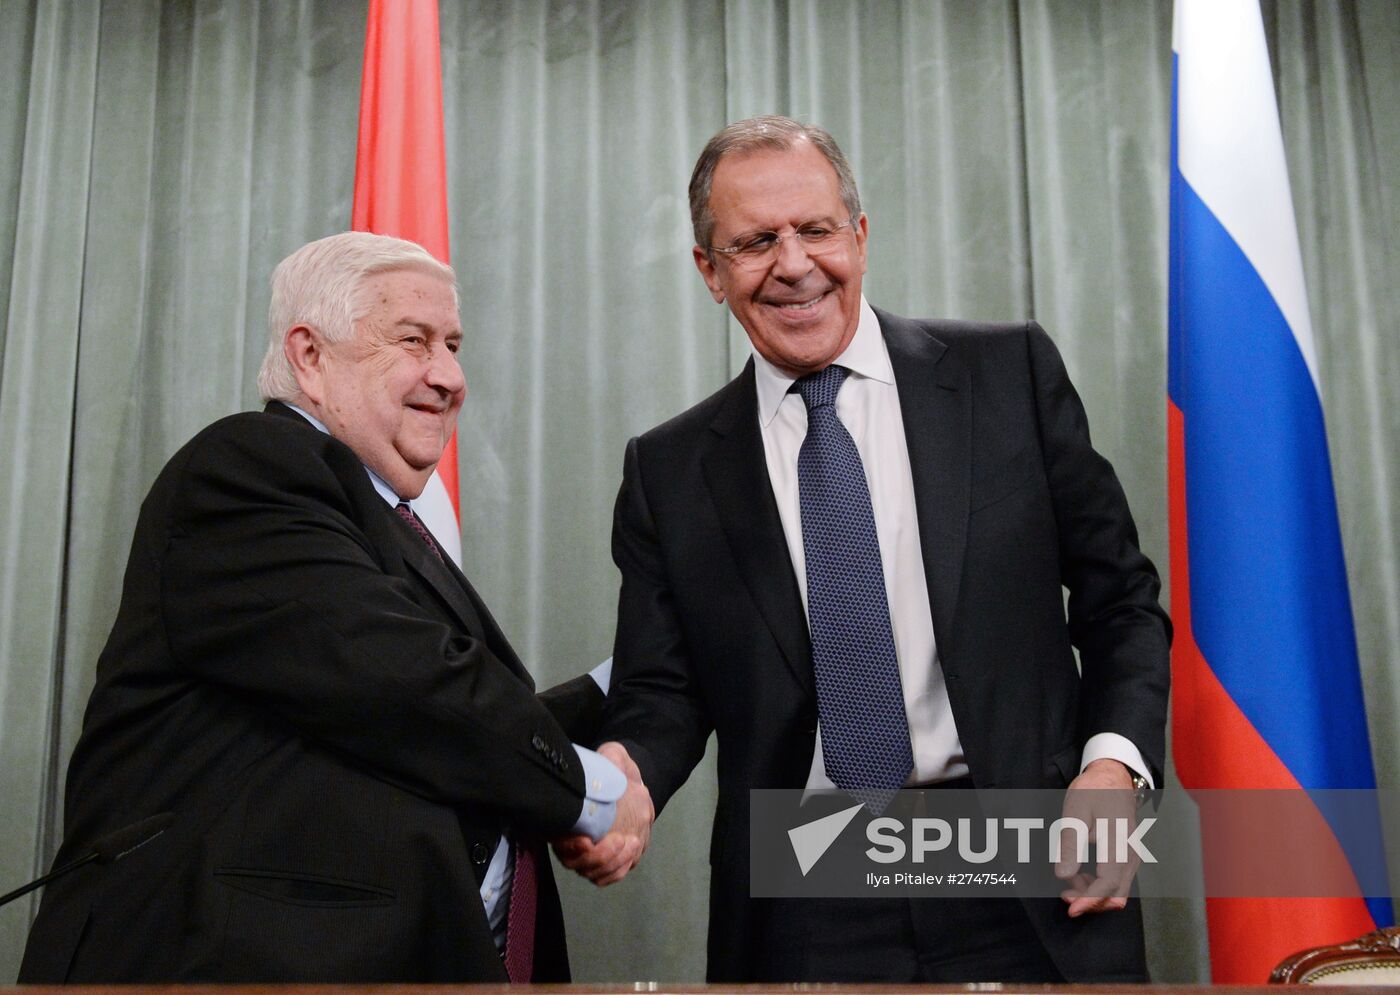 Foreign Minister Sergei Lavrov meets with Syrian Foreign Minister Walid Muallem